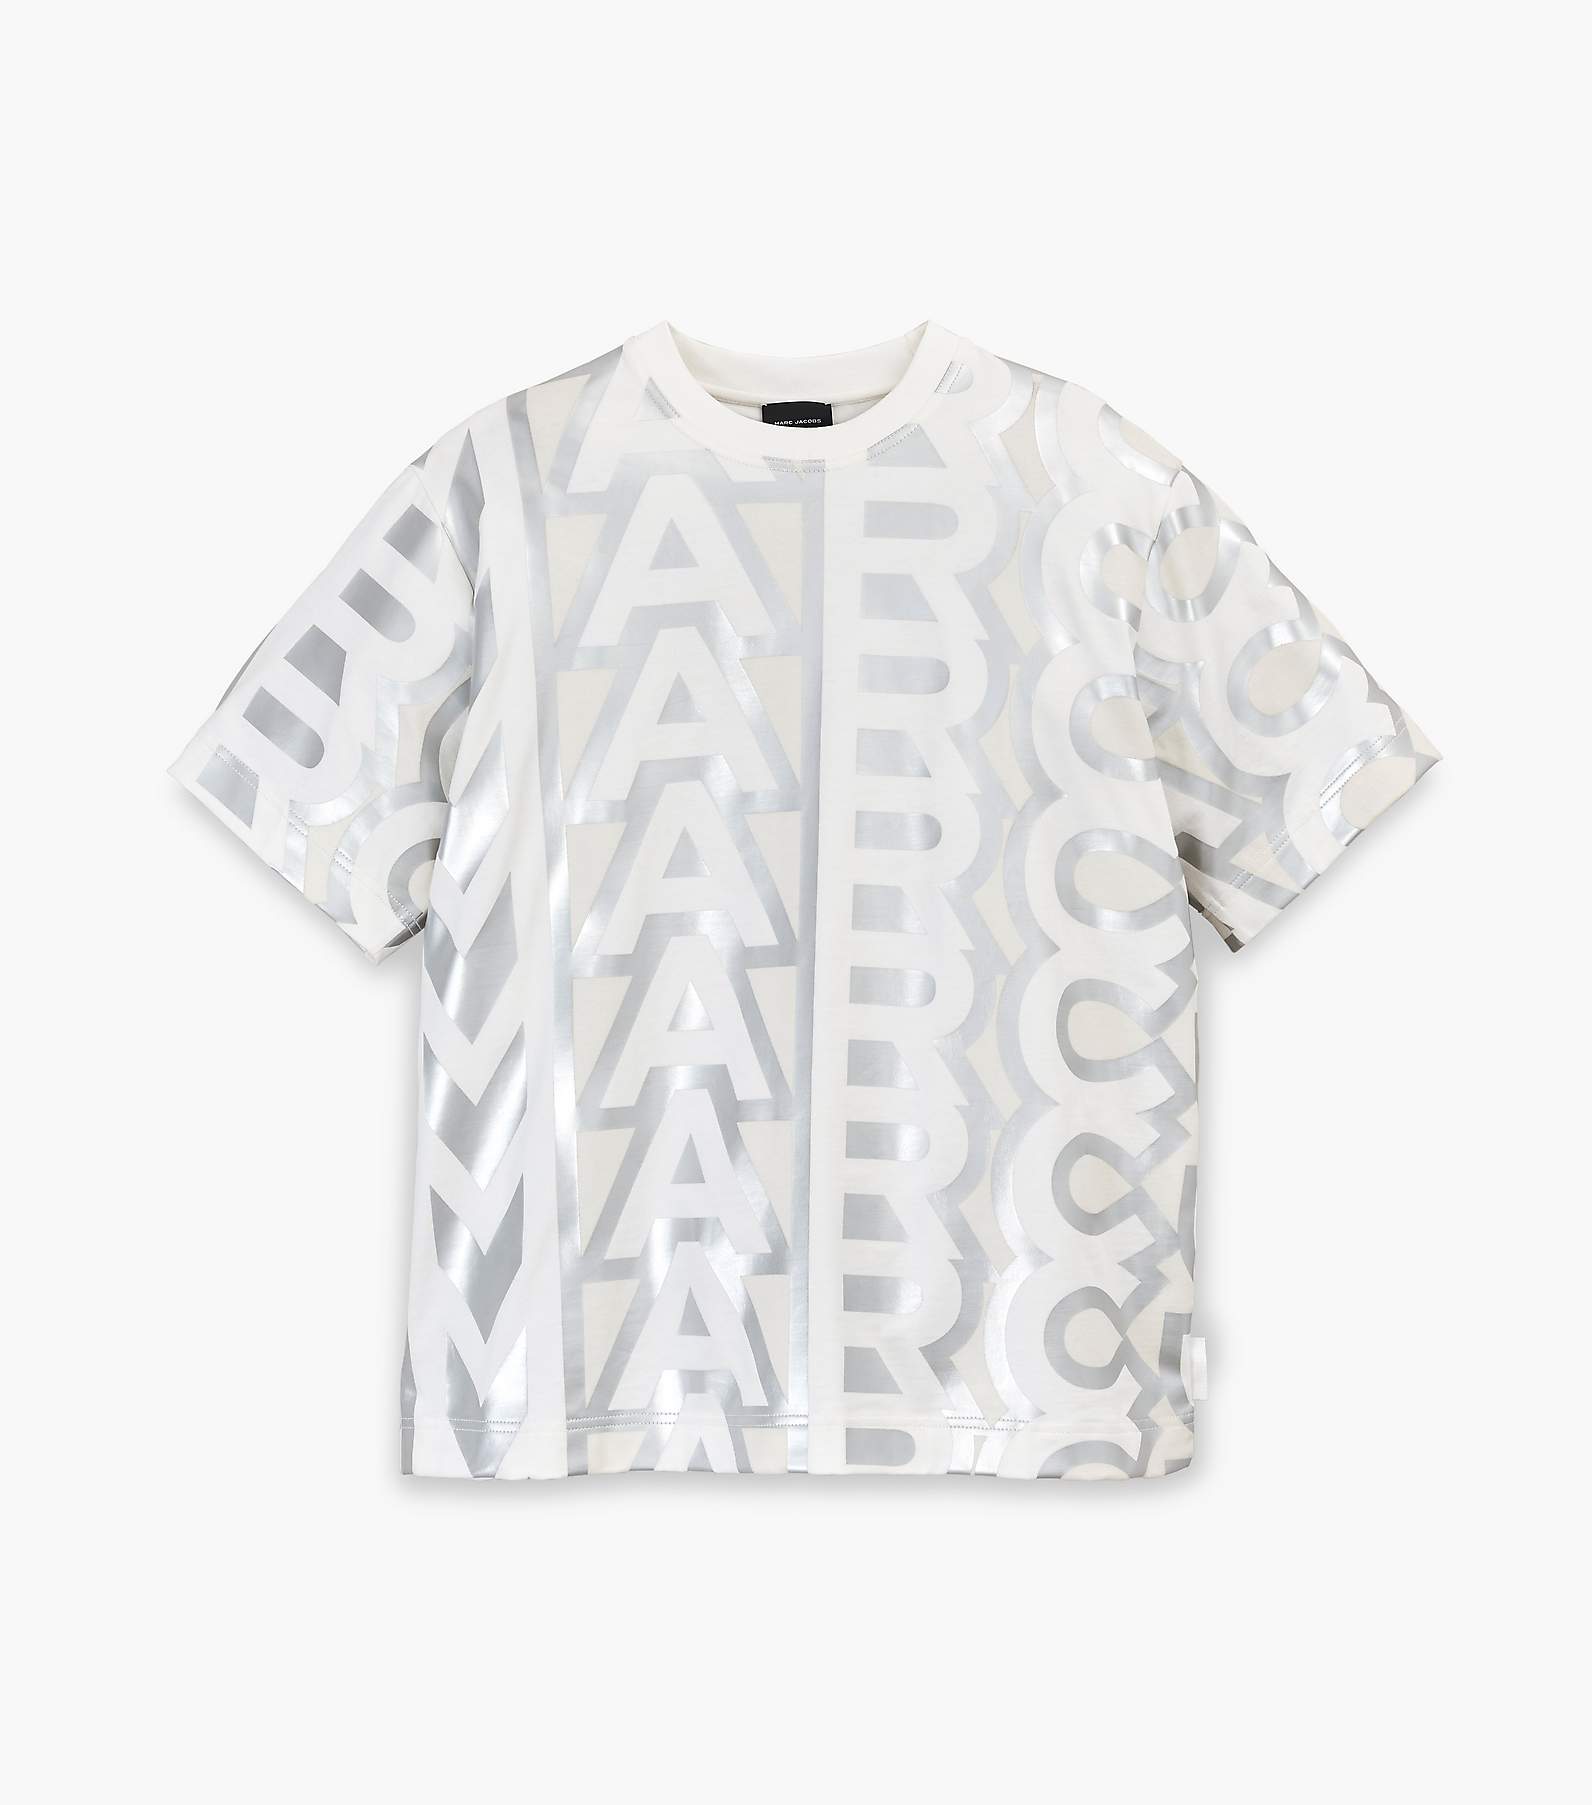 Marc Jacobs The Monogram Big T-Shirt in Silver/Bright White